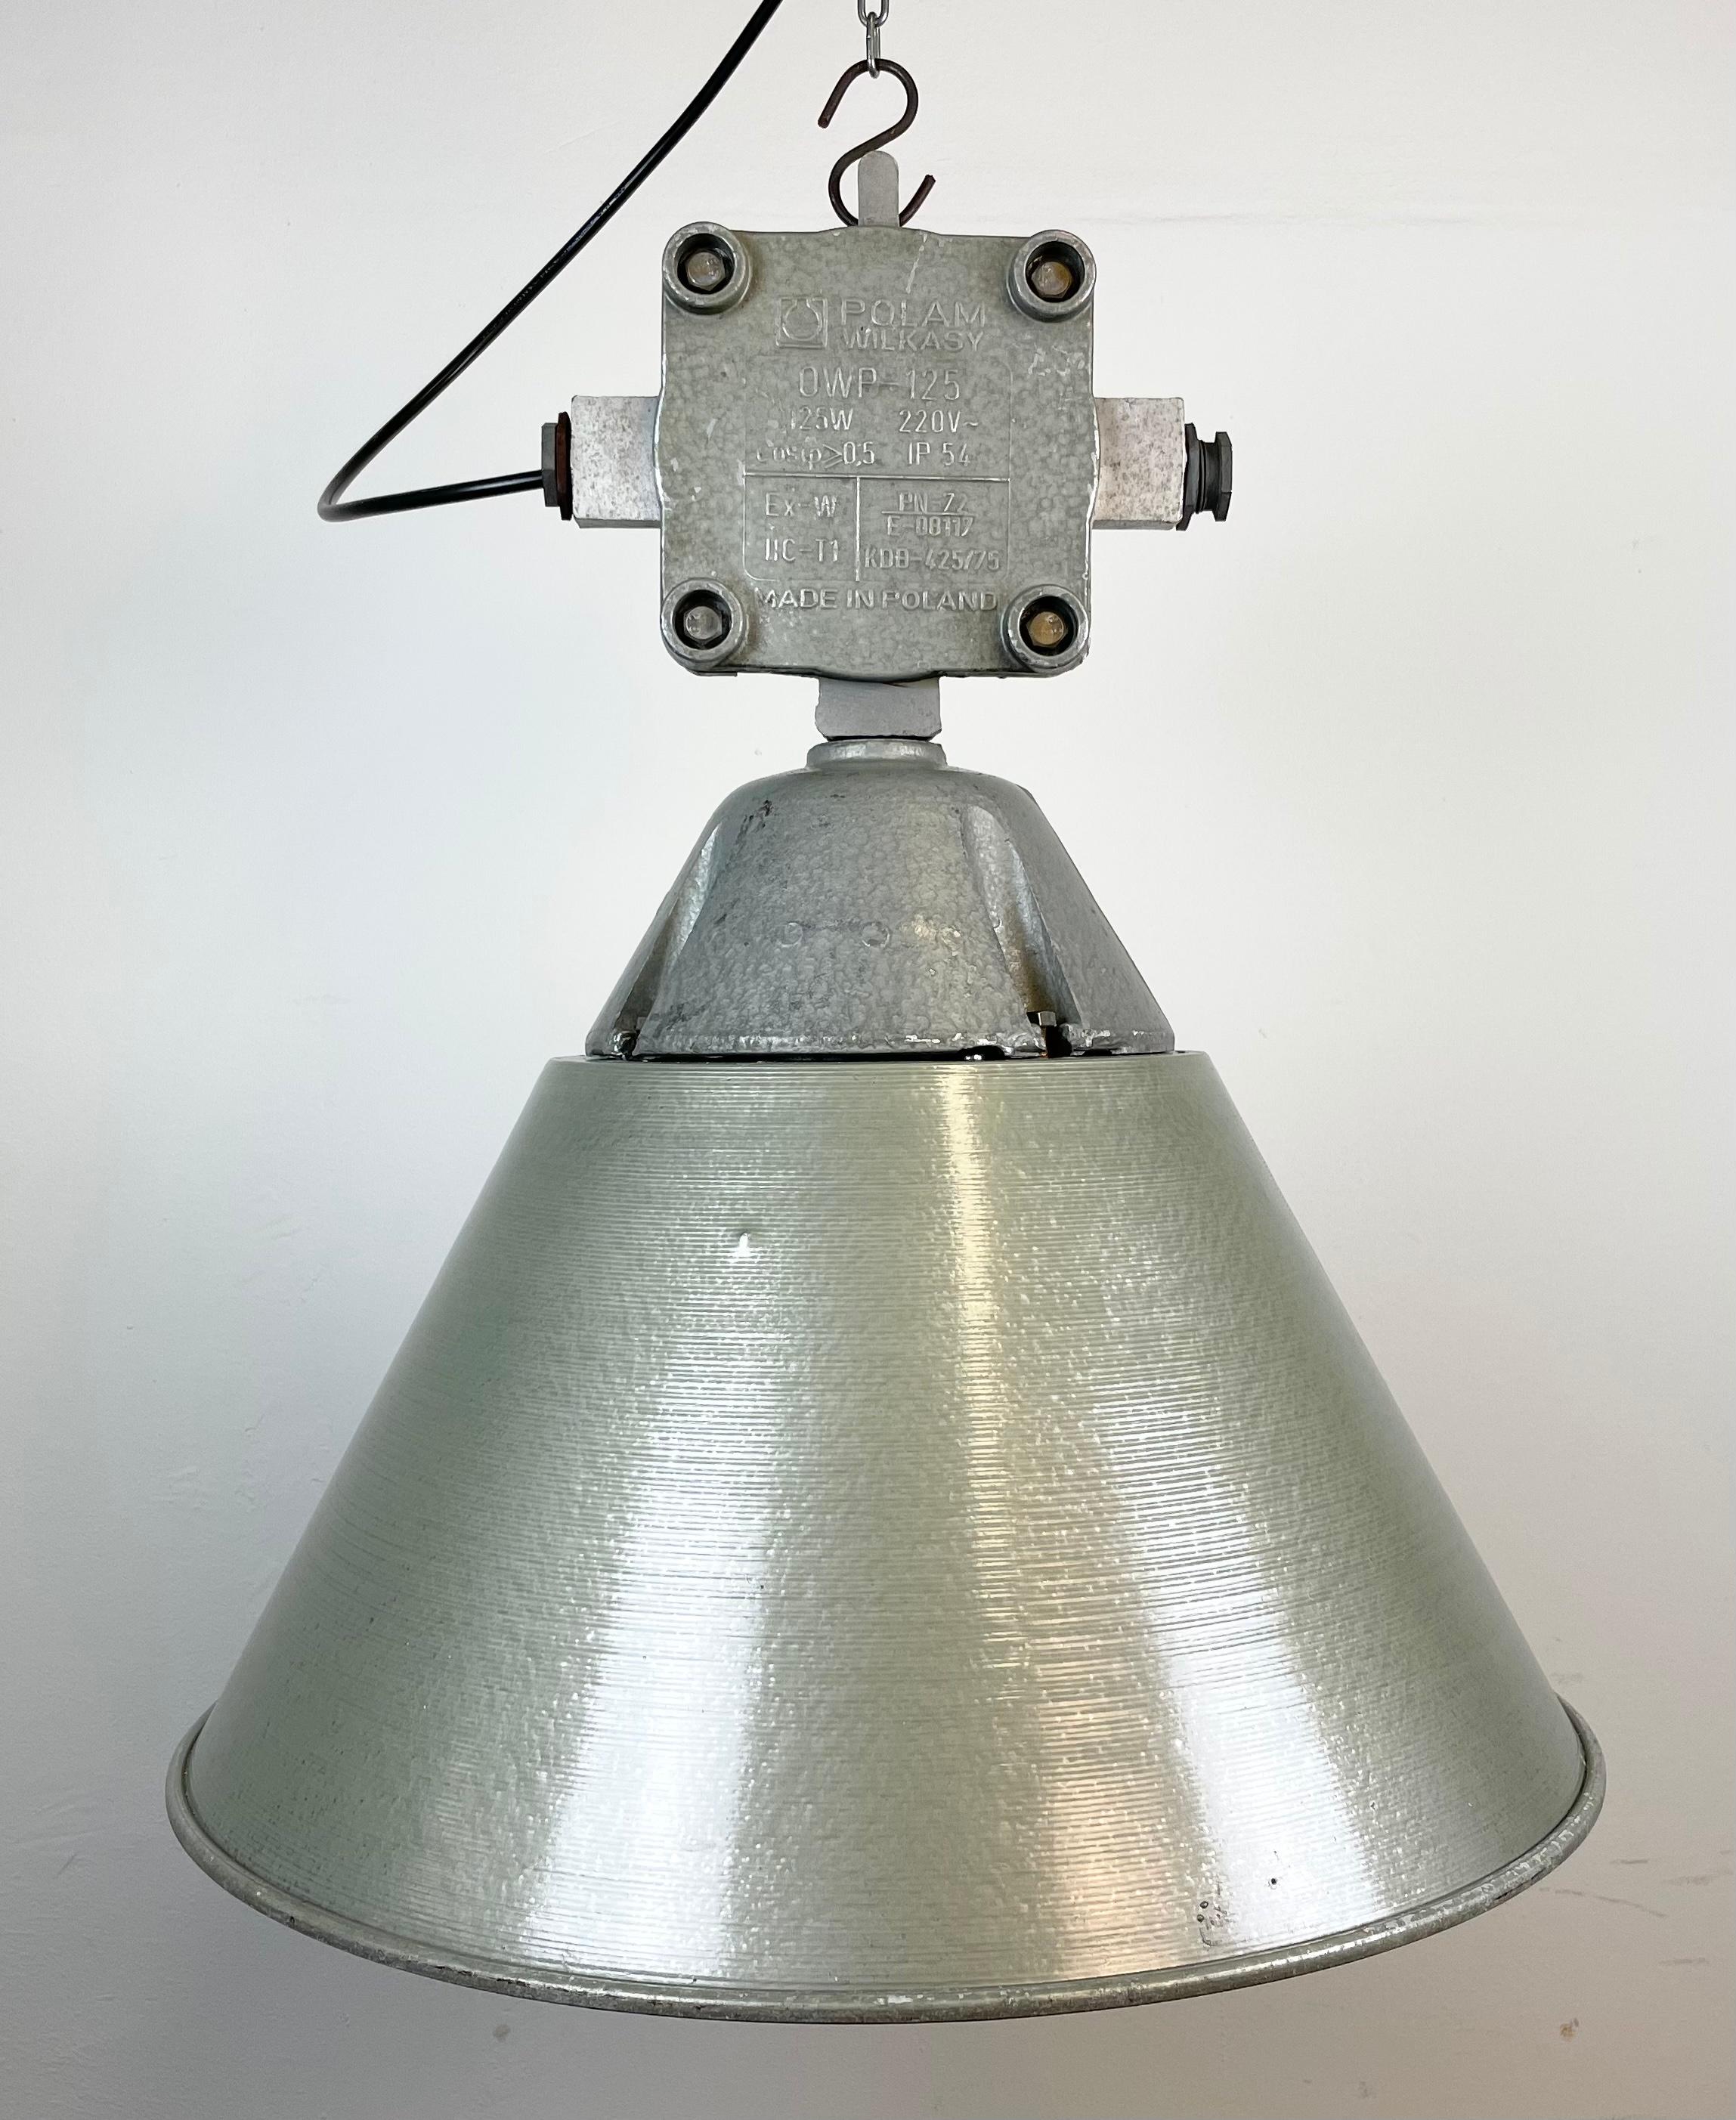 Polish Industrial Explosion Proof Lamp with Aluminium Shade from Polam, 1970s For Sale